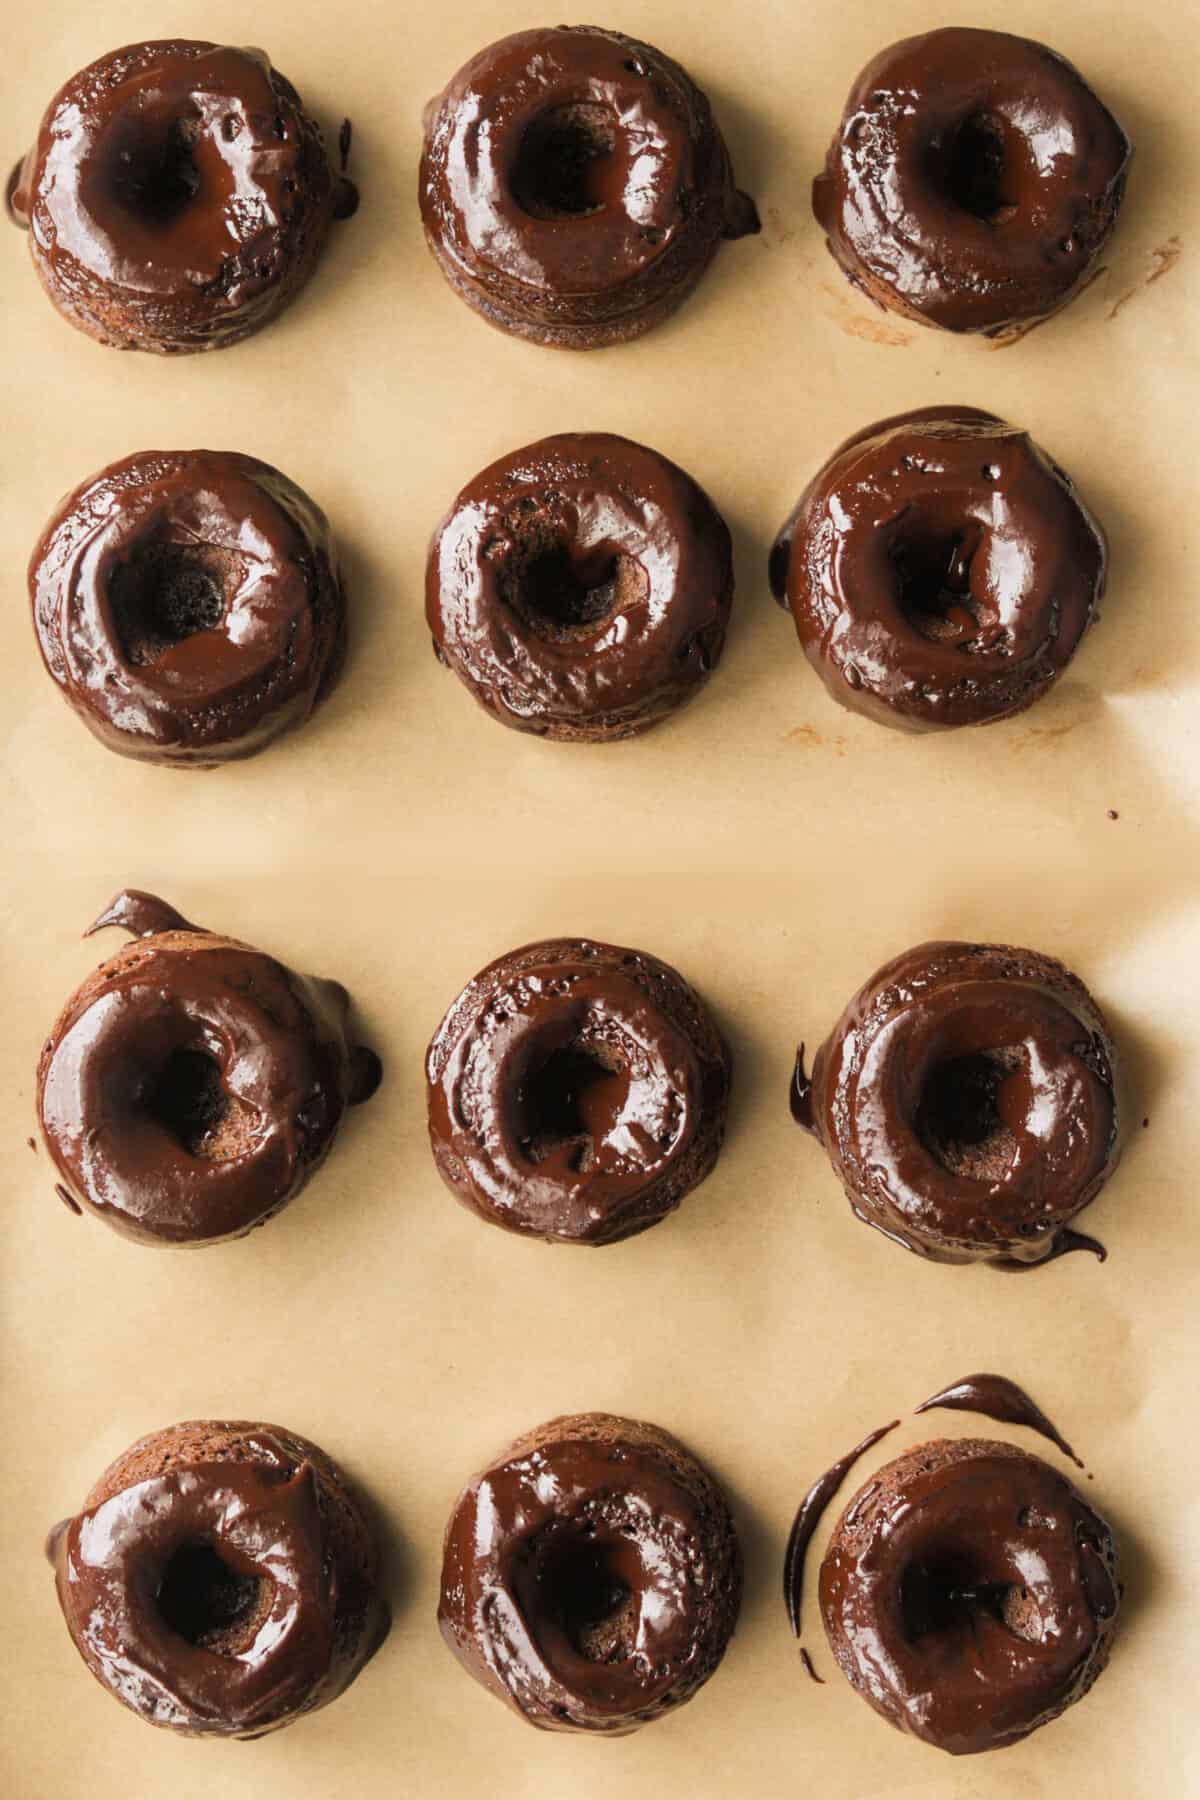 An overhead shot of chocolate glazed donuts lined on parchment paper.